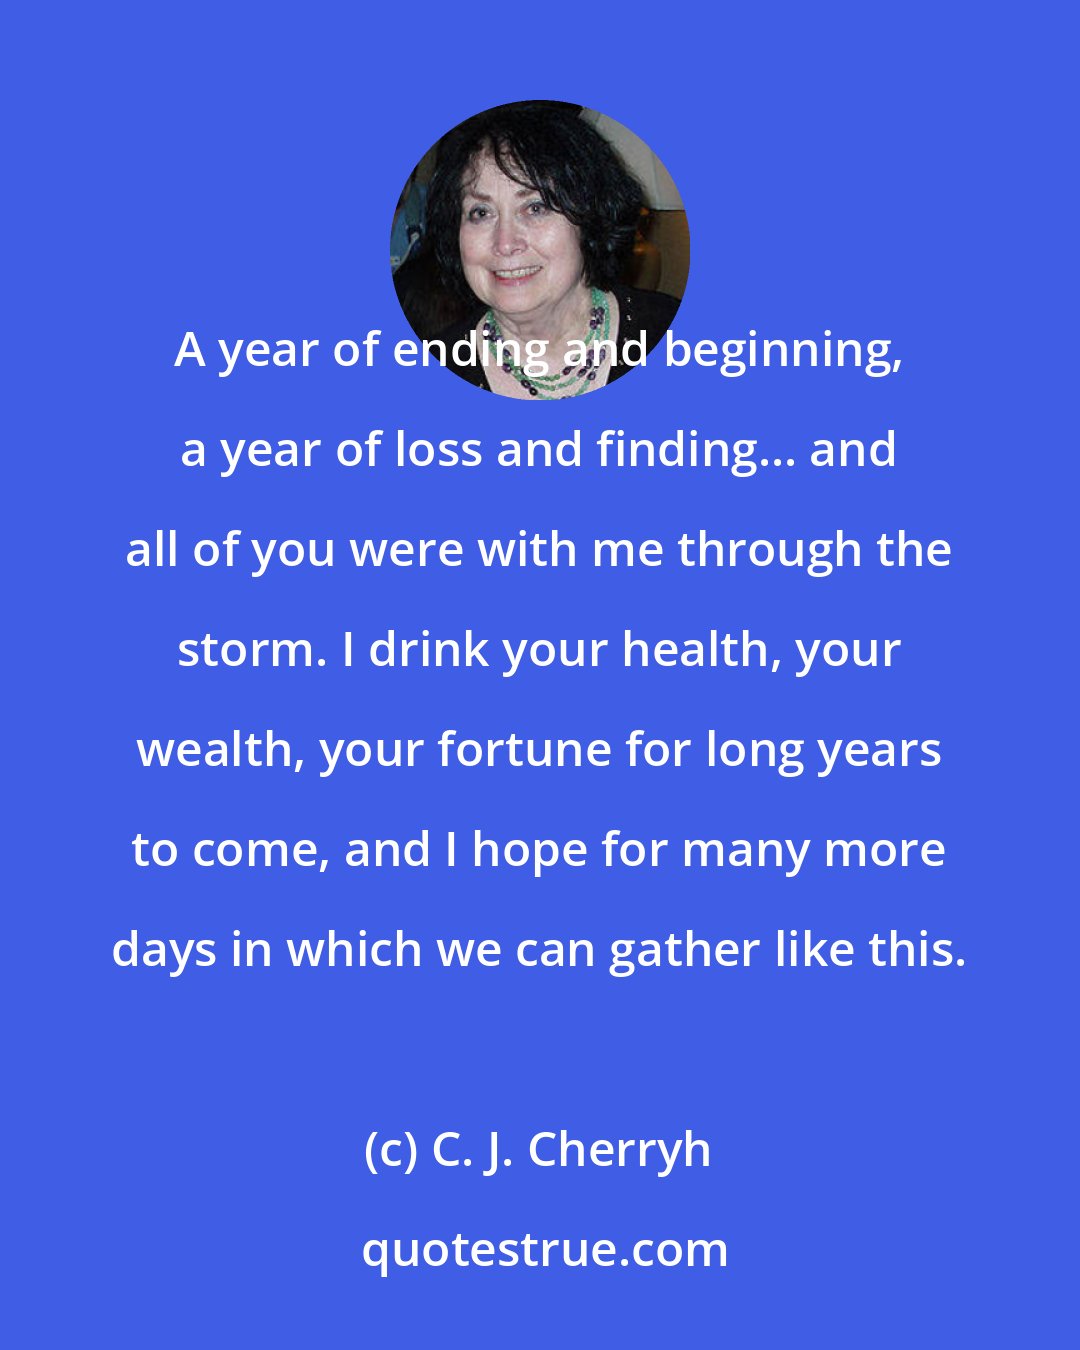 C. J. Cherryh: A year of ending and beginning, a year of loss and finding... and all of you were with me through the storm. I drink your health, your wealth, your fortune for long years to come, and I hope for many more days in which we can gather like this.